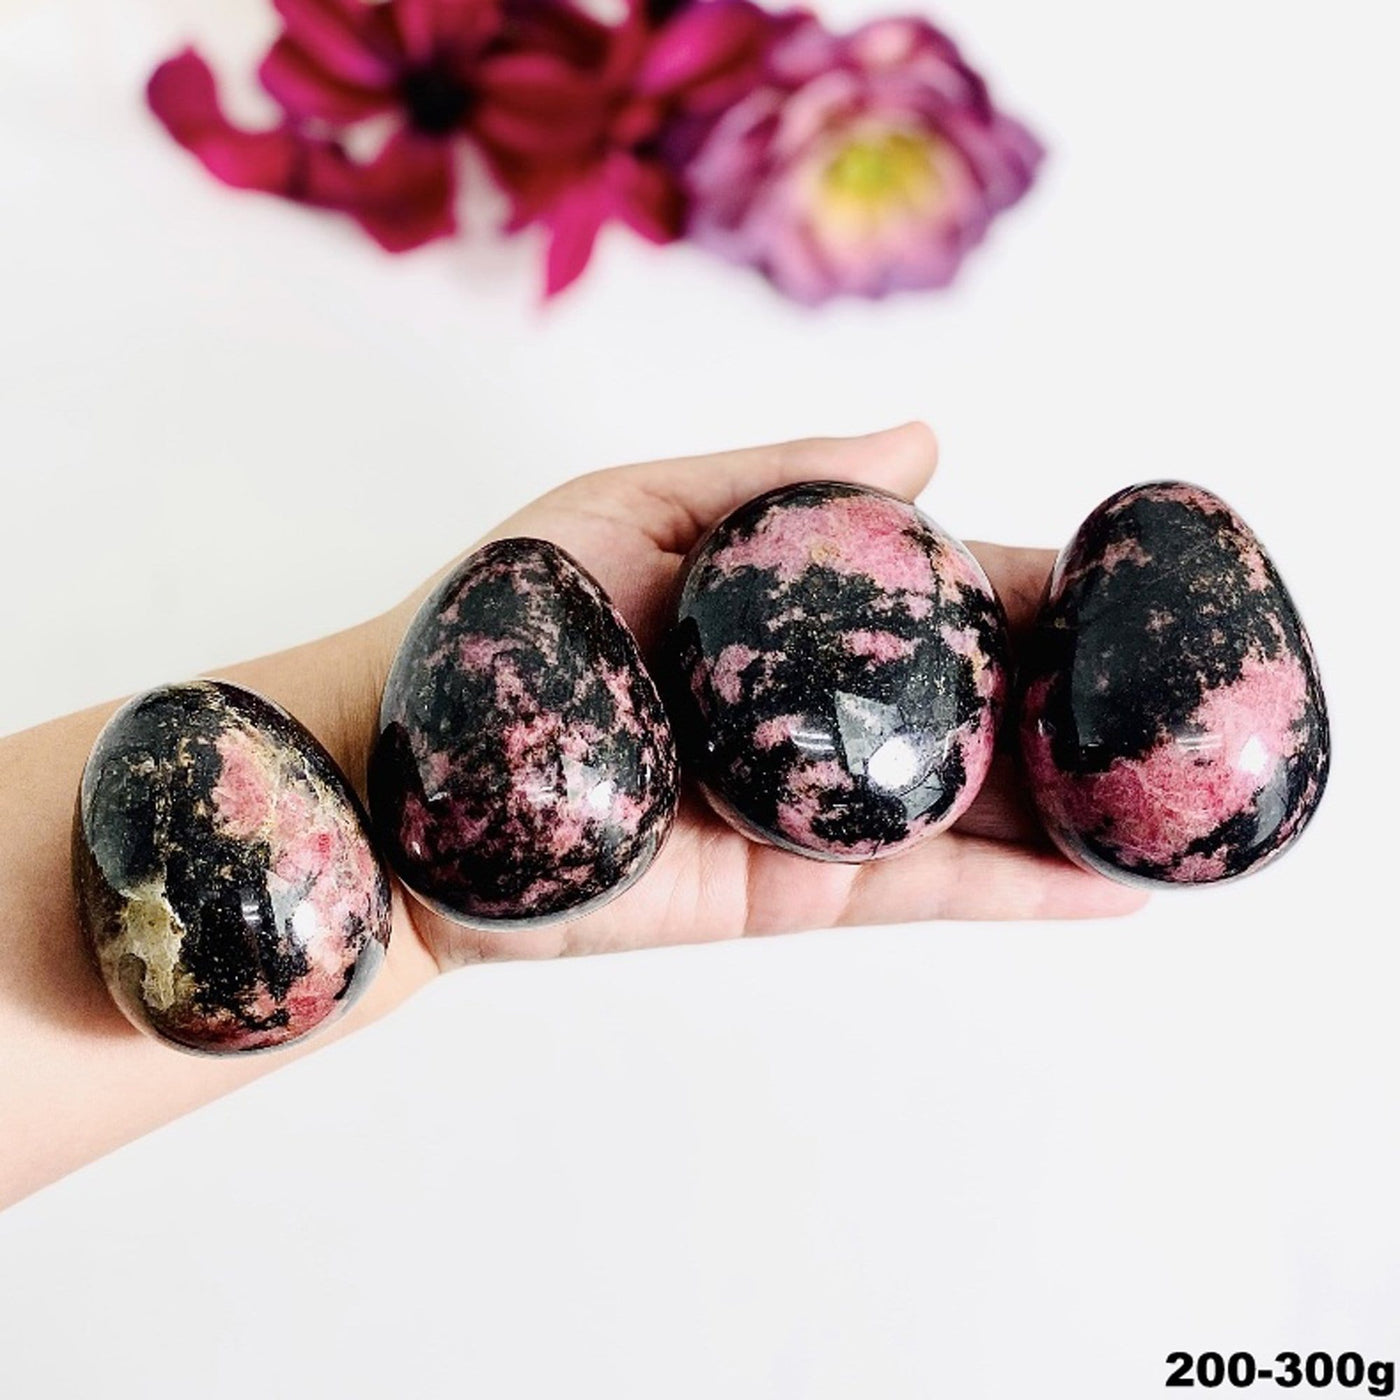 Hand holding up 200-300g Rhodonite Palm Stones with flowers blurred on white background